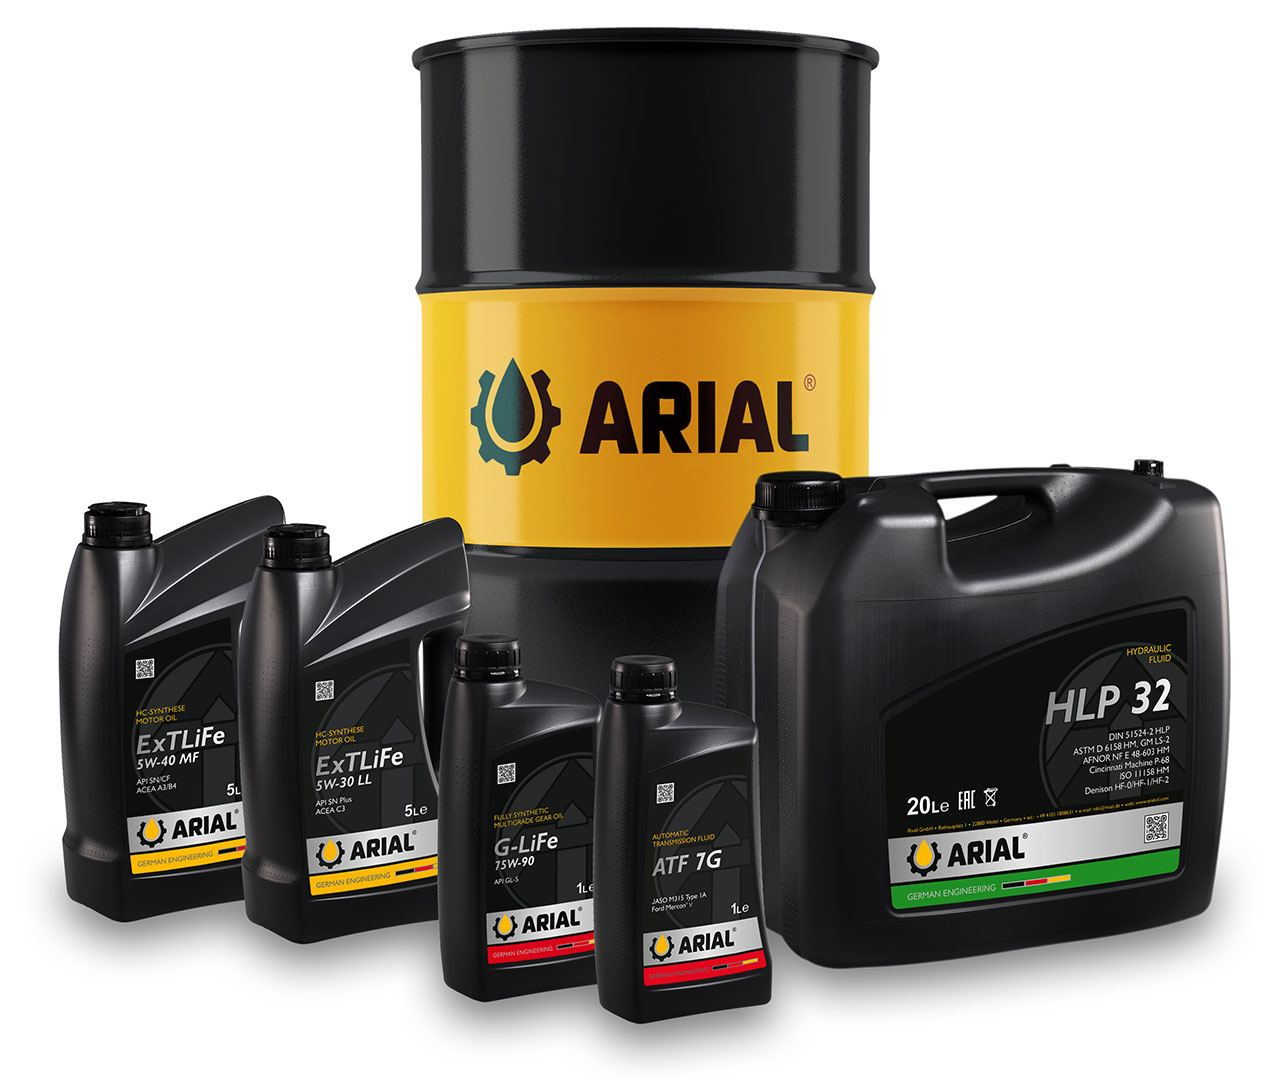 ARIAL-OIL-PRODUCTS-ABOUT-US-2.jpg